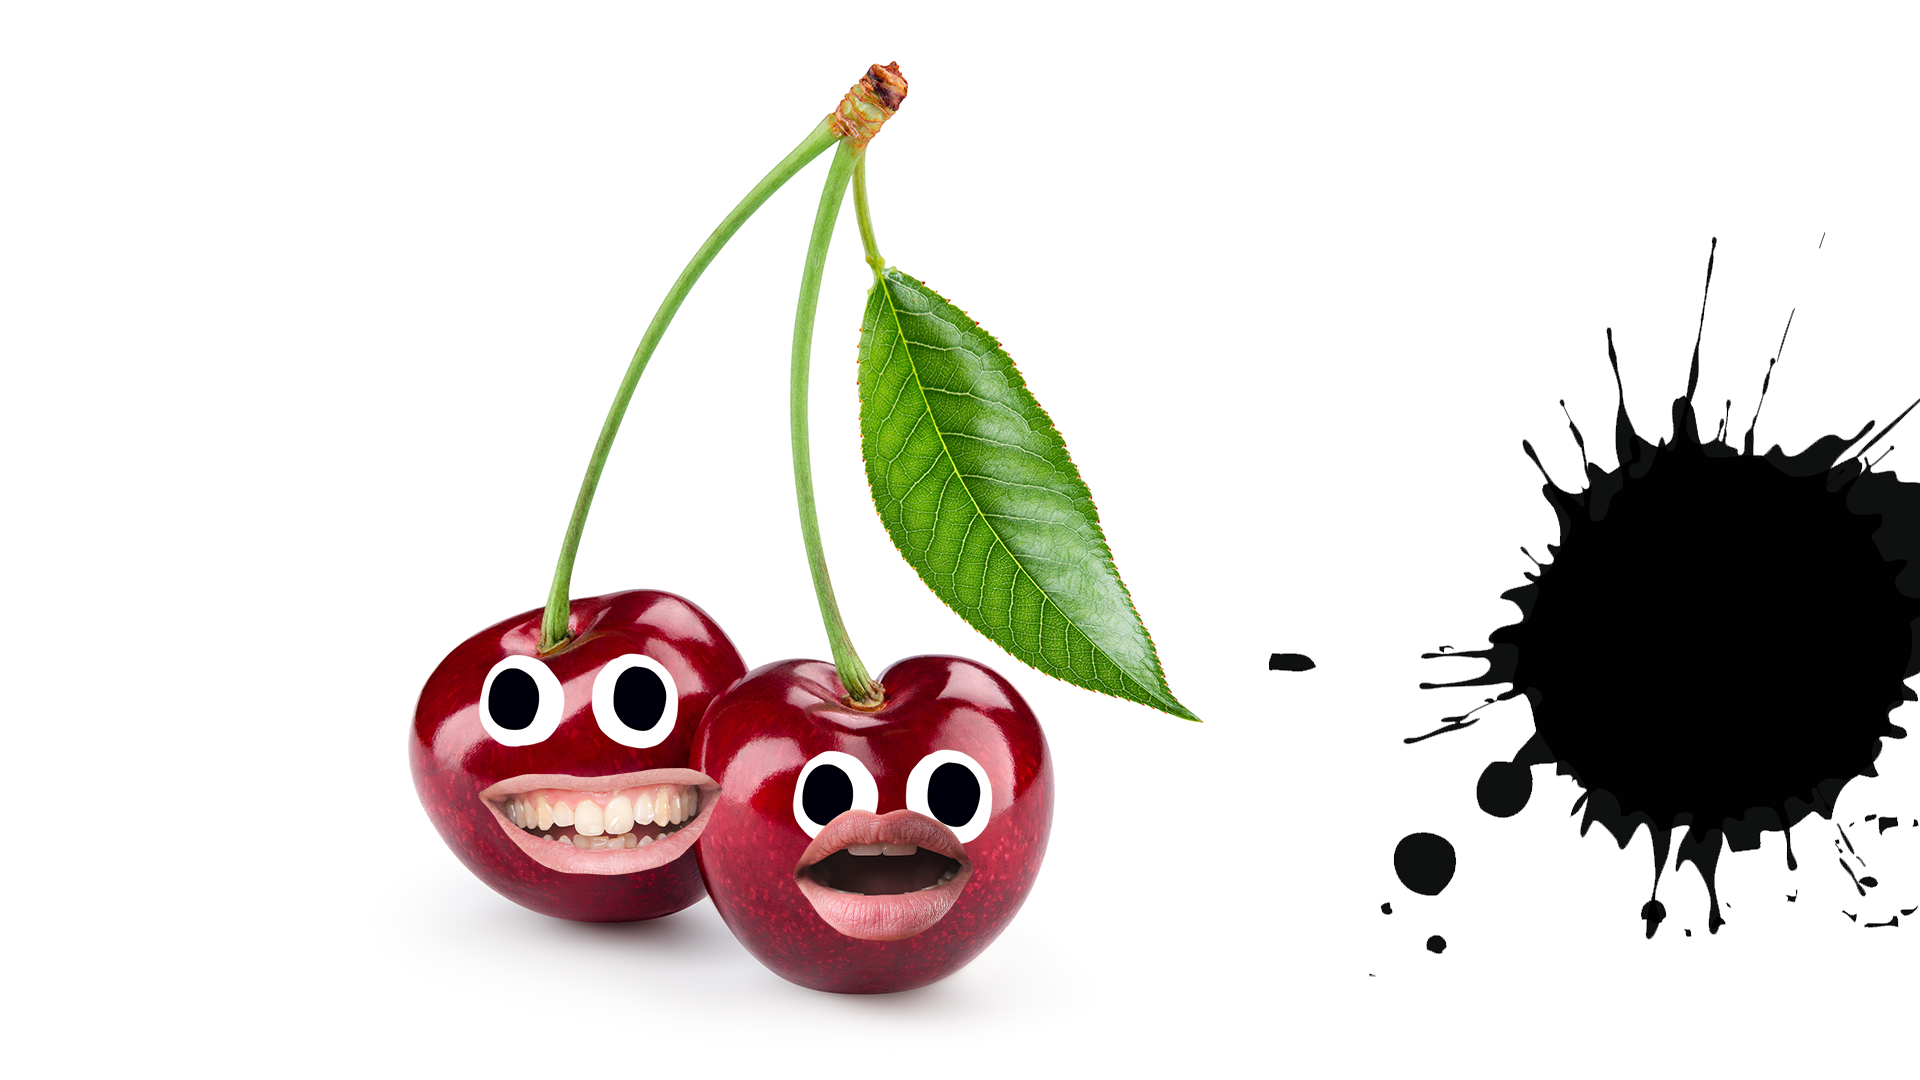 Cherries with faces on white background